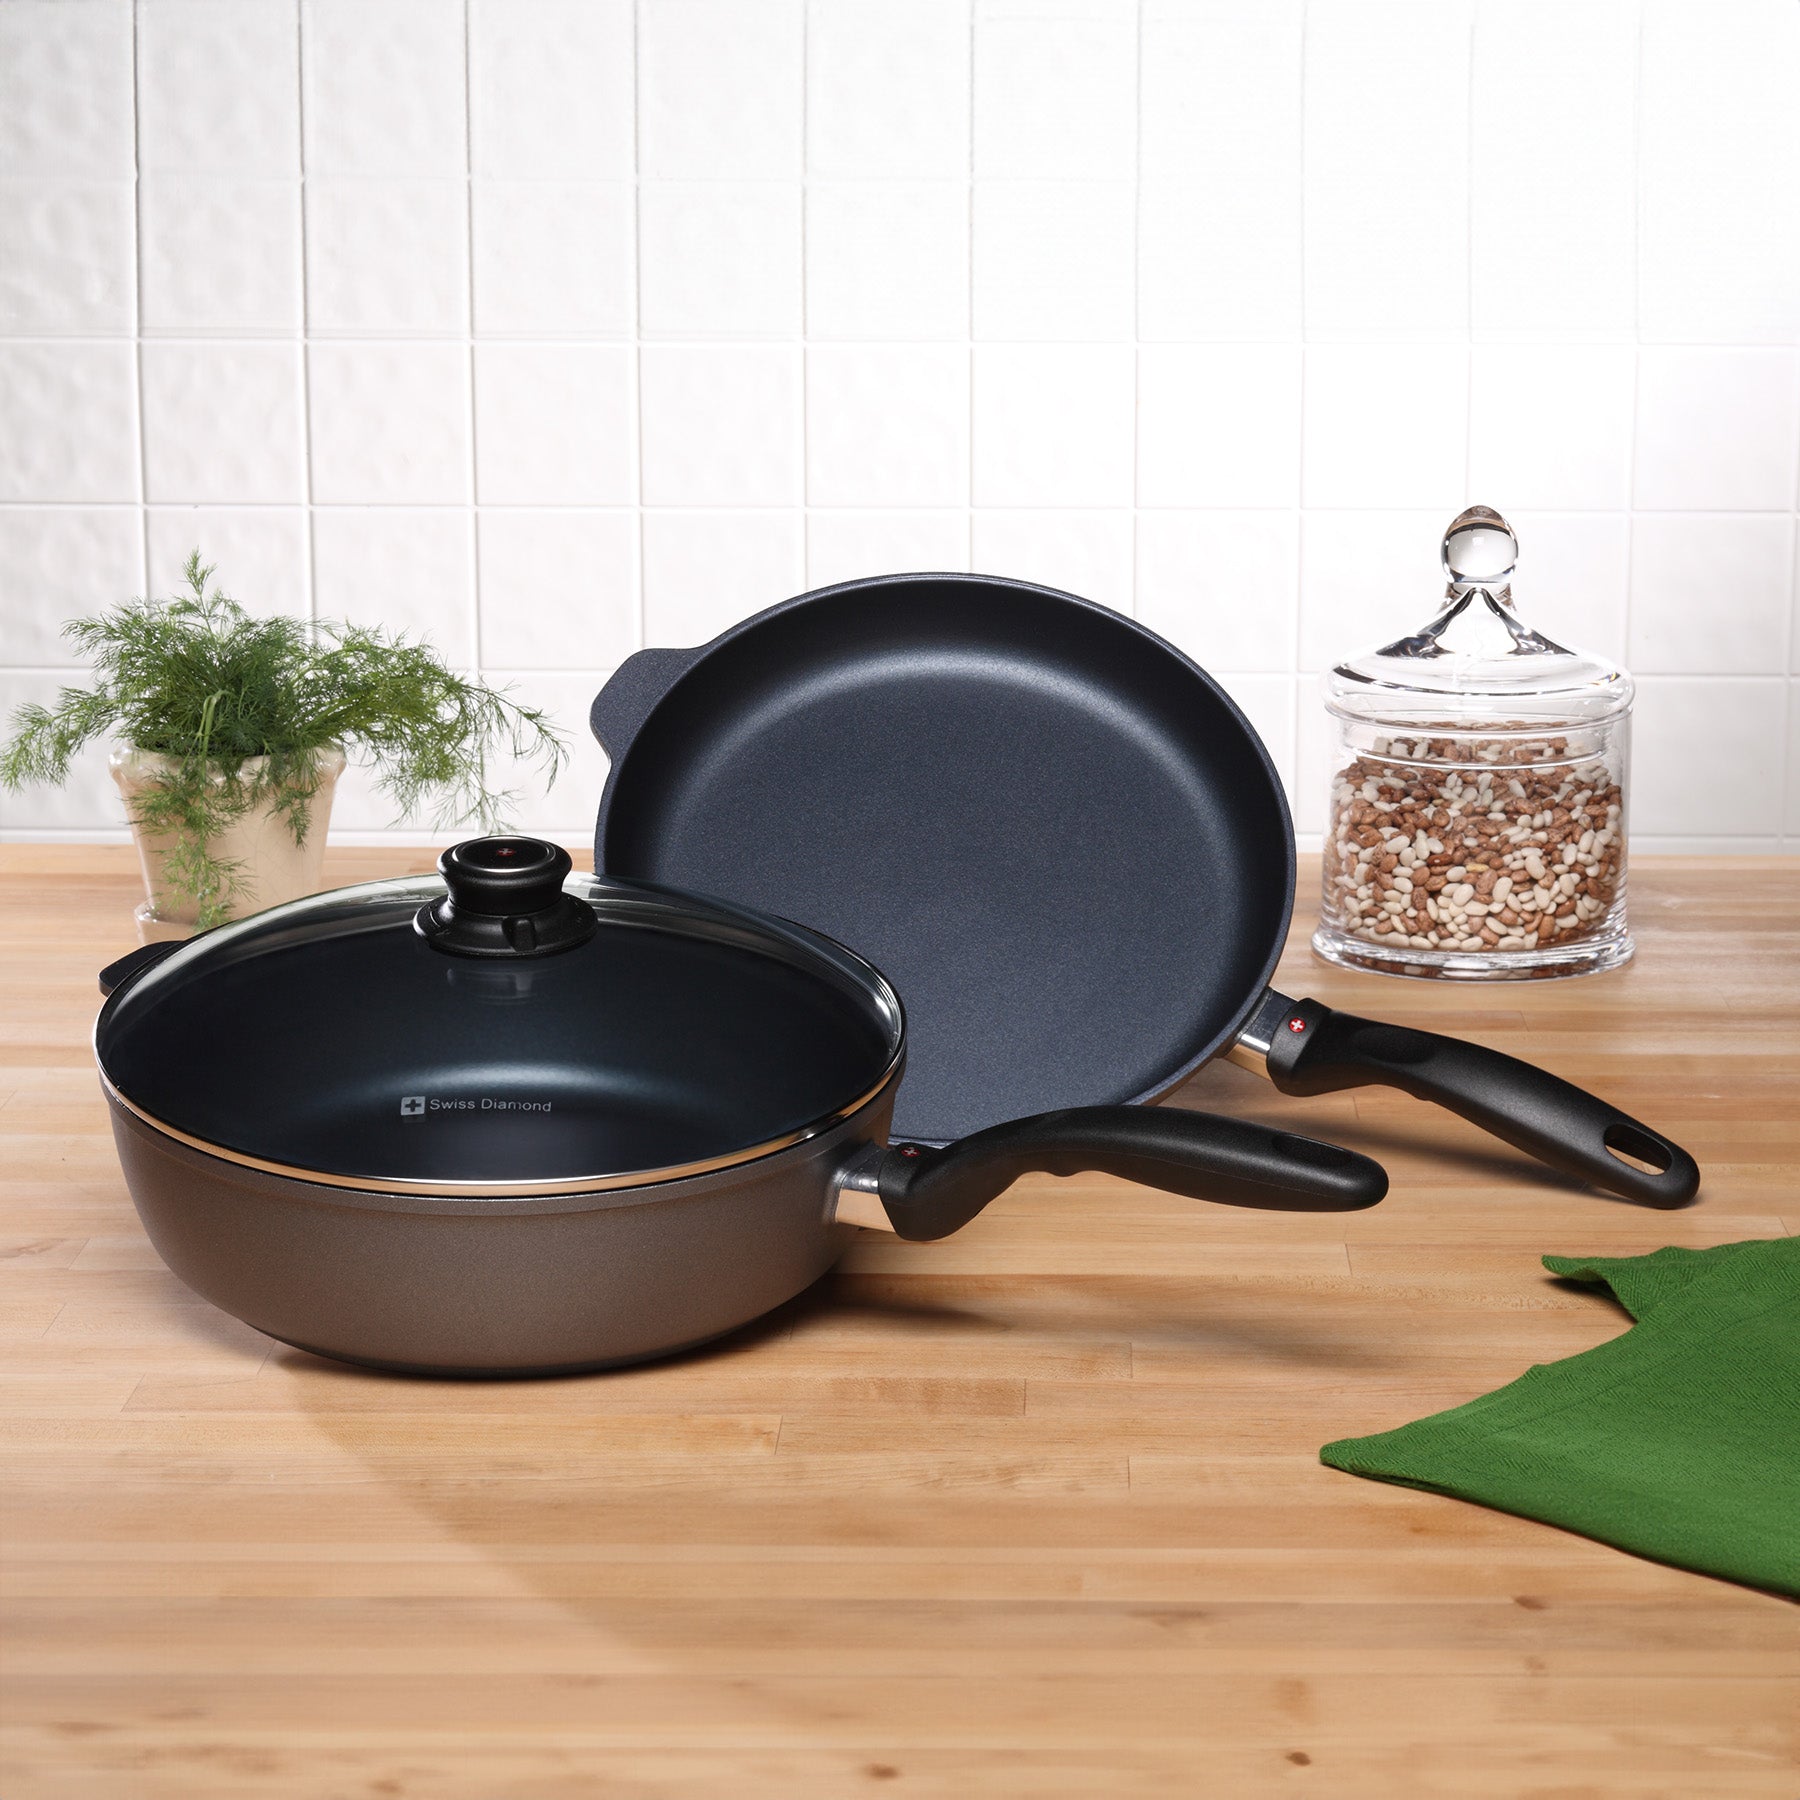 HD Nonstick 3-Piece Set - Fry Pan & Saute Pan - Induction on kitchen counter